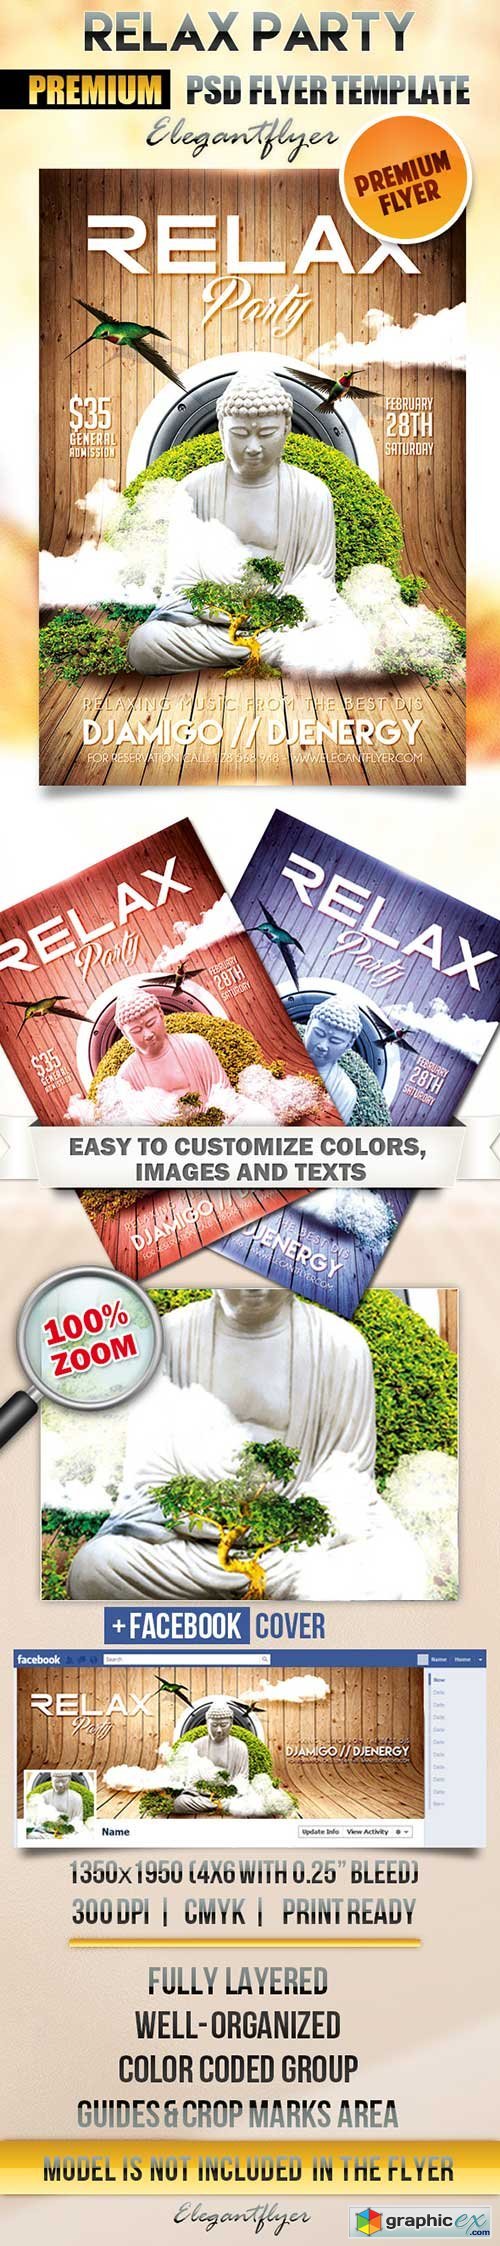 Relax Party Flyer PSD Template + Facebook Cover